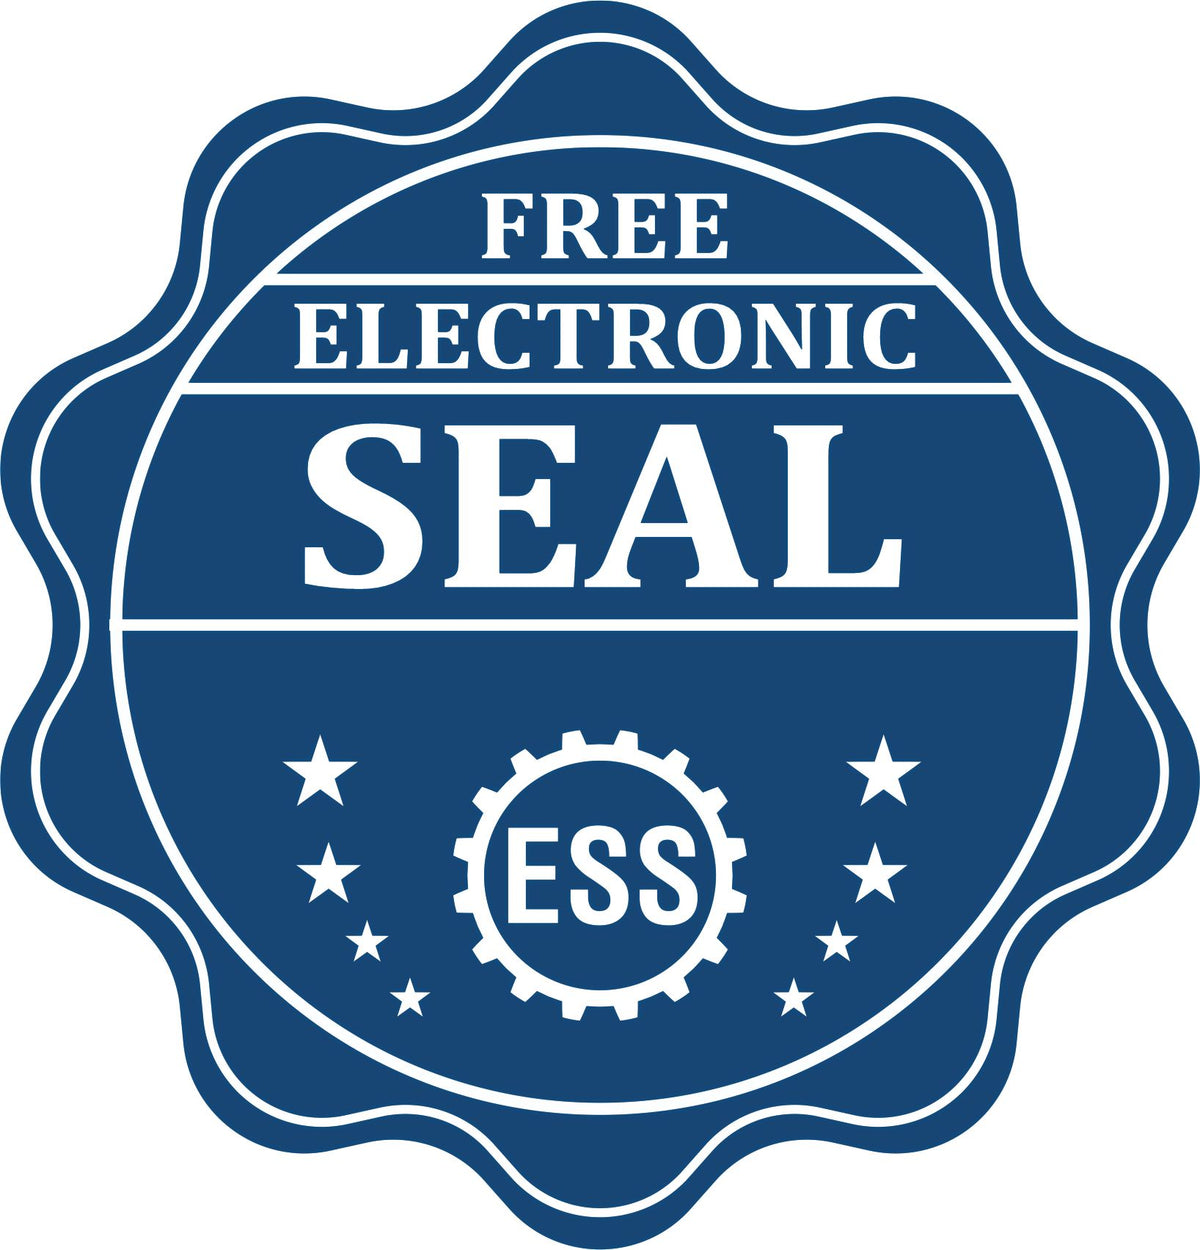 A badge showing a free electronic seal for the Heavy Duty Cast Iron Idaho Engineer Seal Embosser with stars and the ESS gear on the emblem.